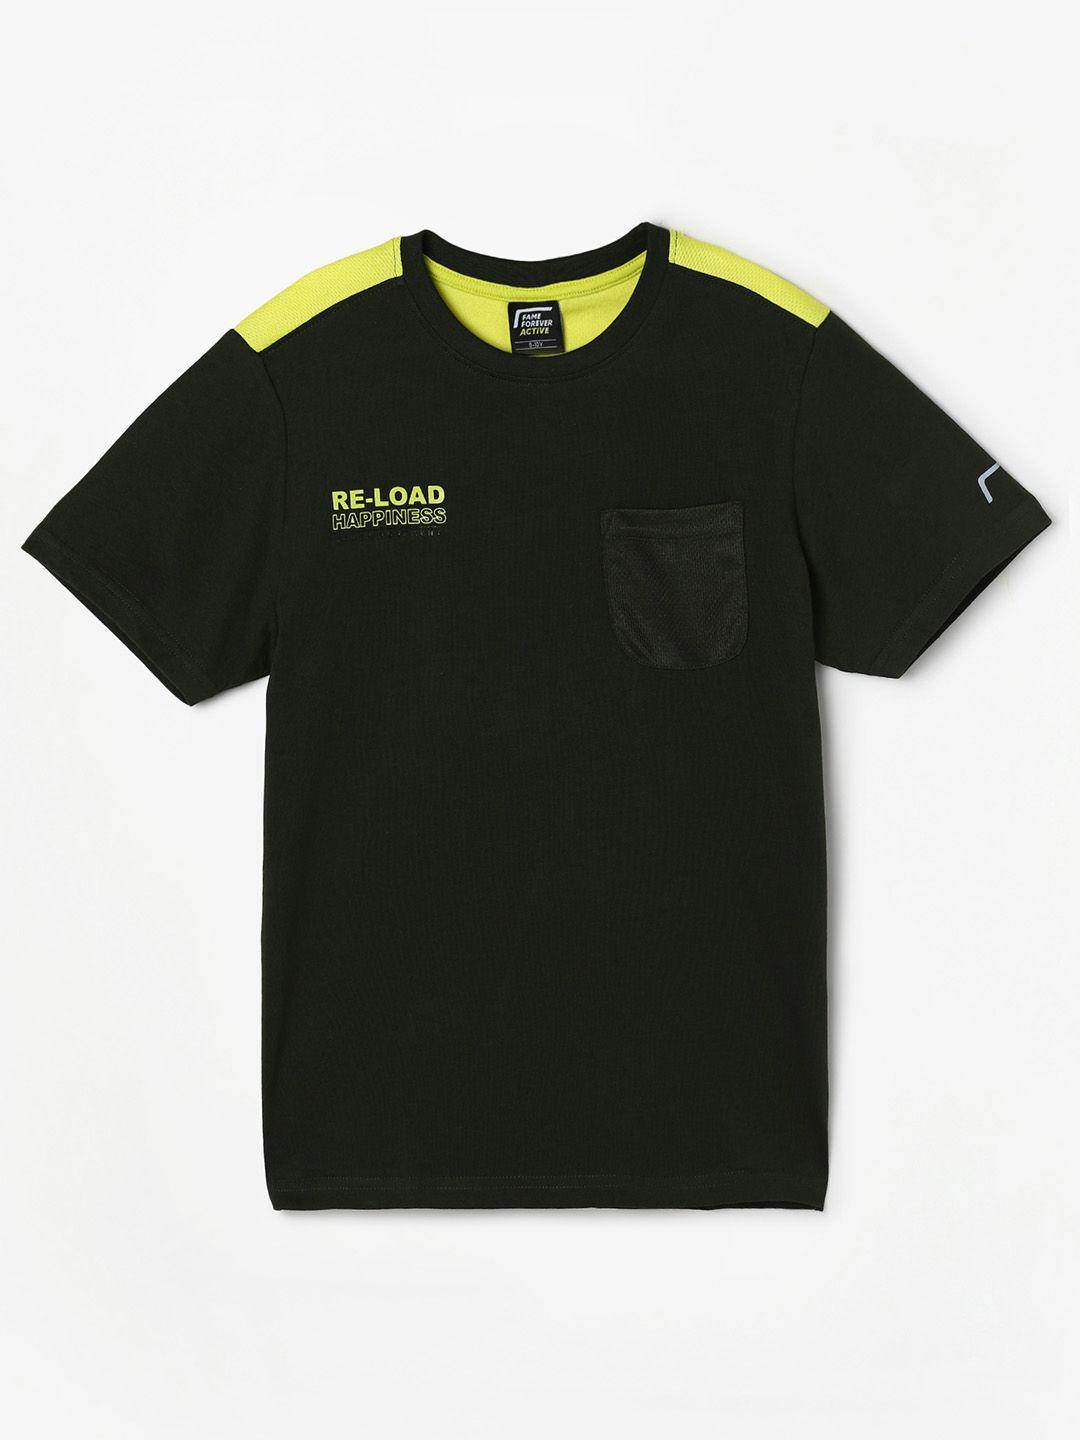 fame forever by lifestyle boys olive green & yellow pure cotton t-shirt